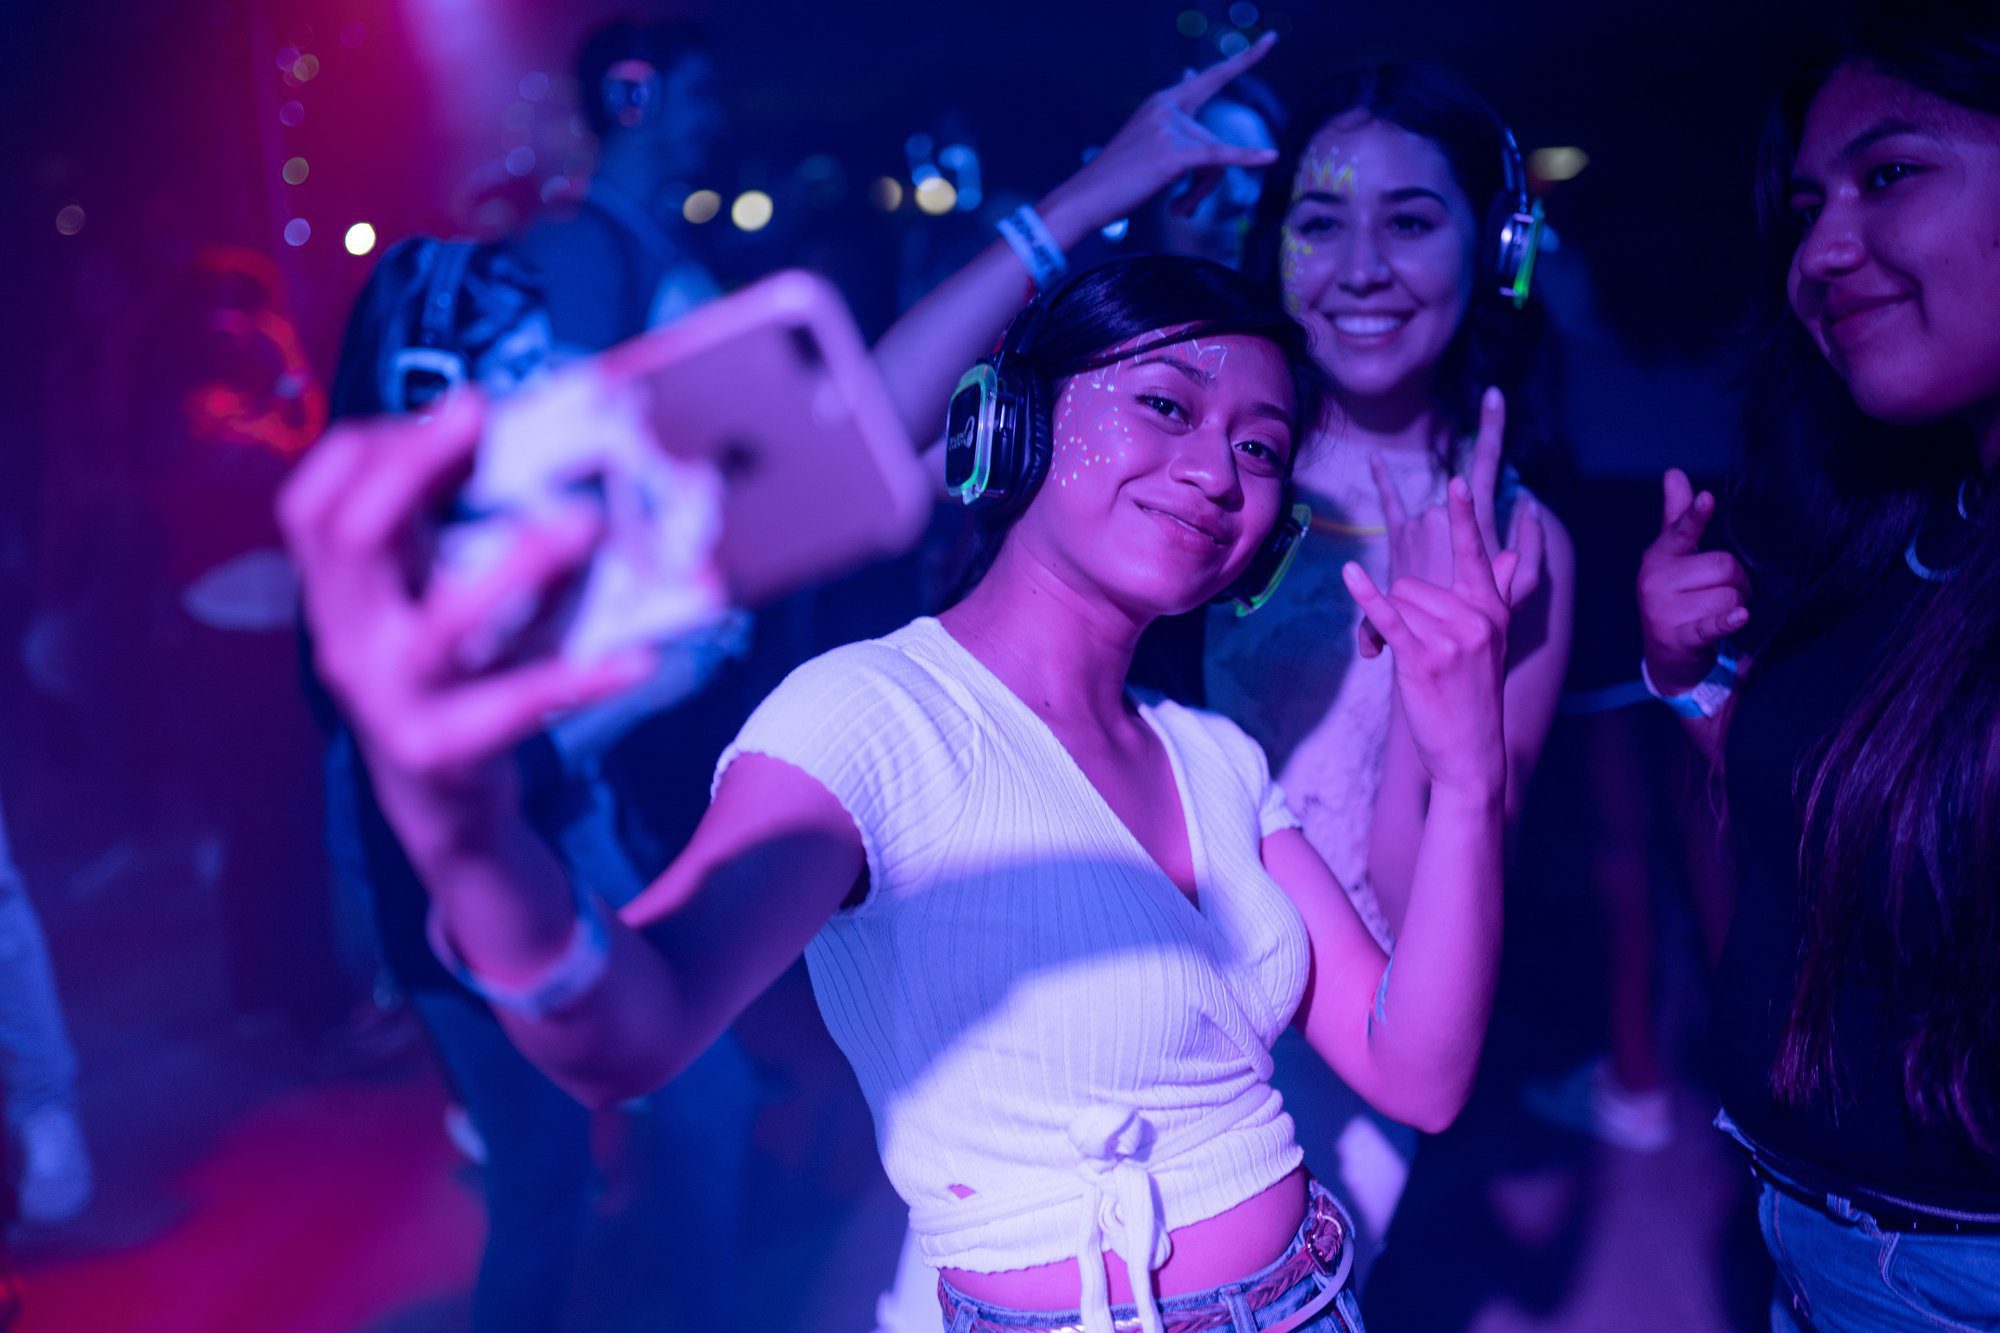 female teenager taking a selfie at a party